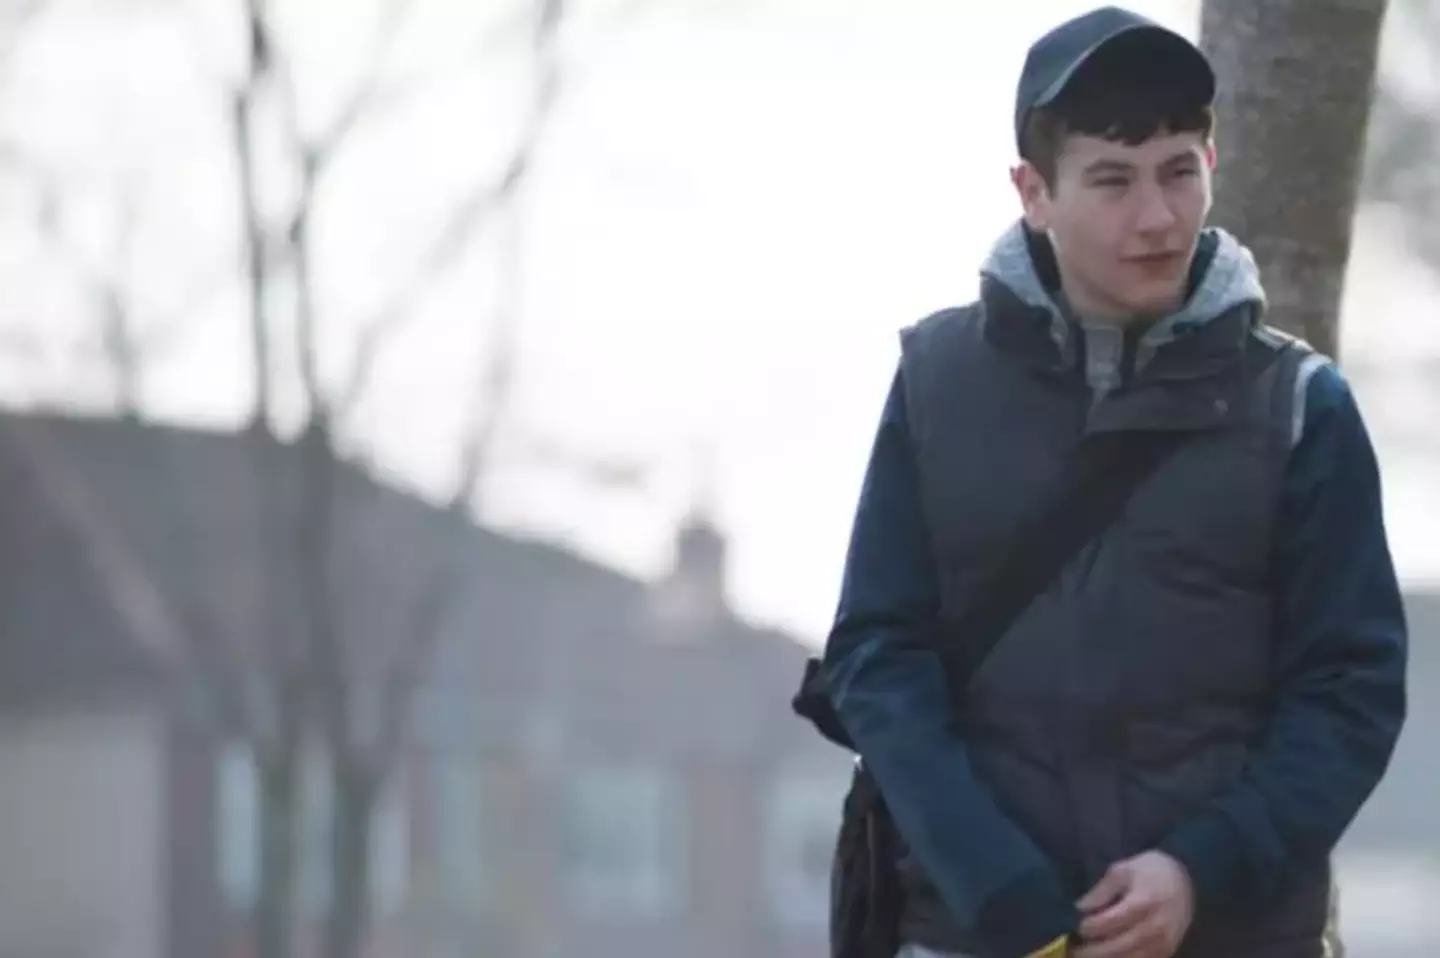 A young Barry Keoghan also stars.